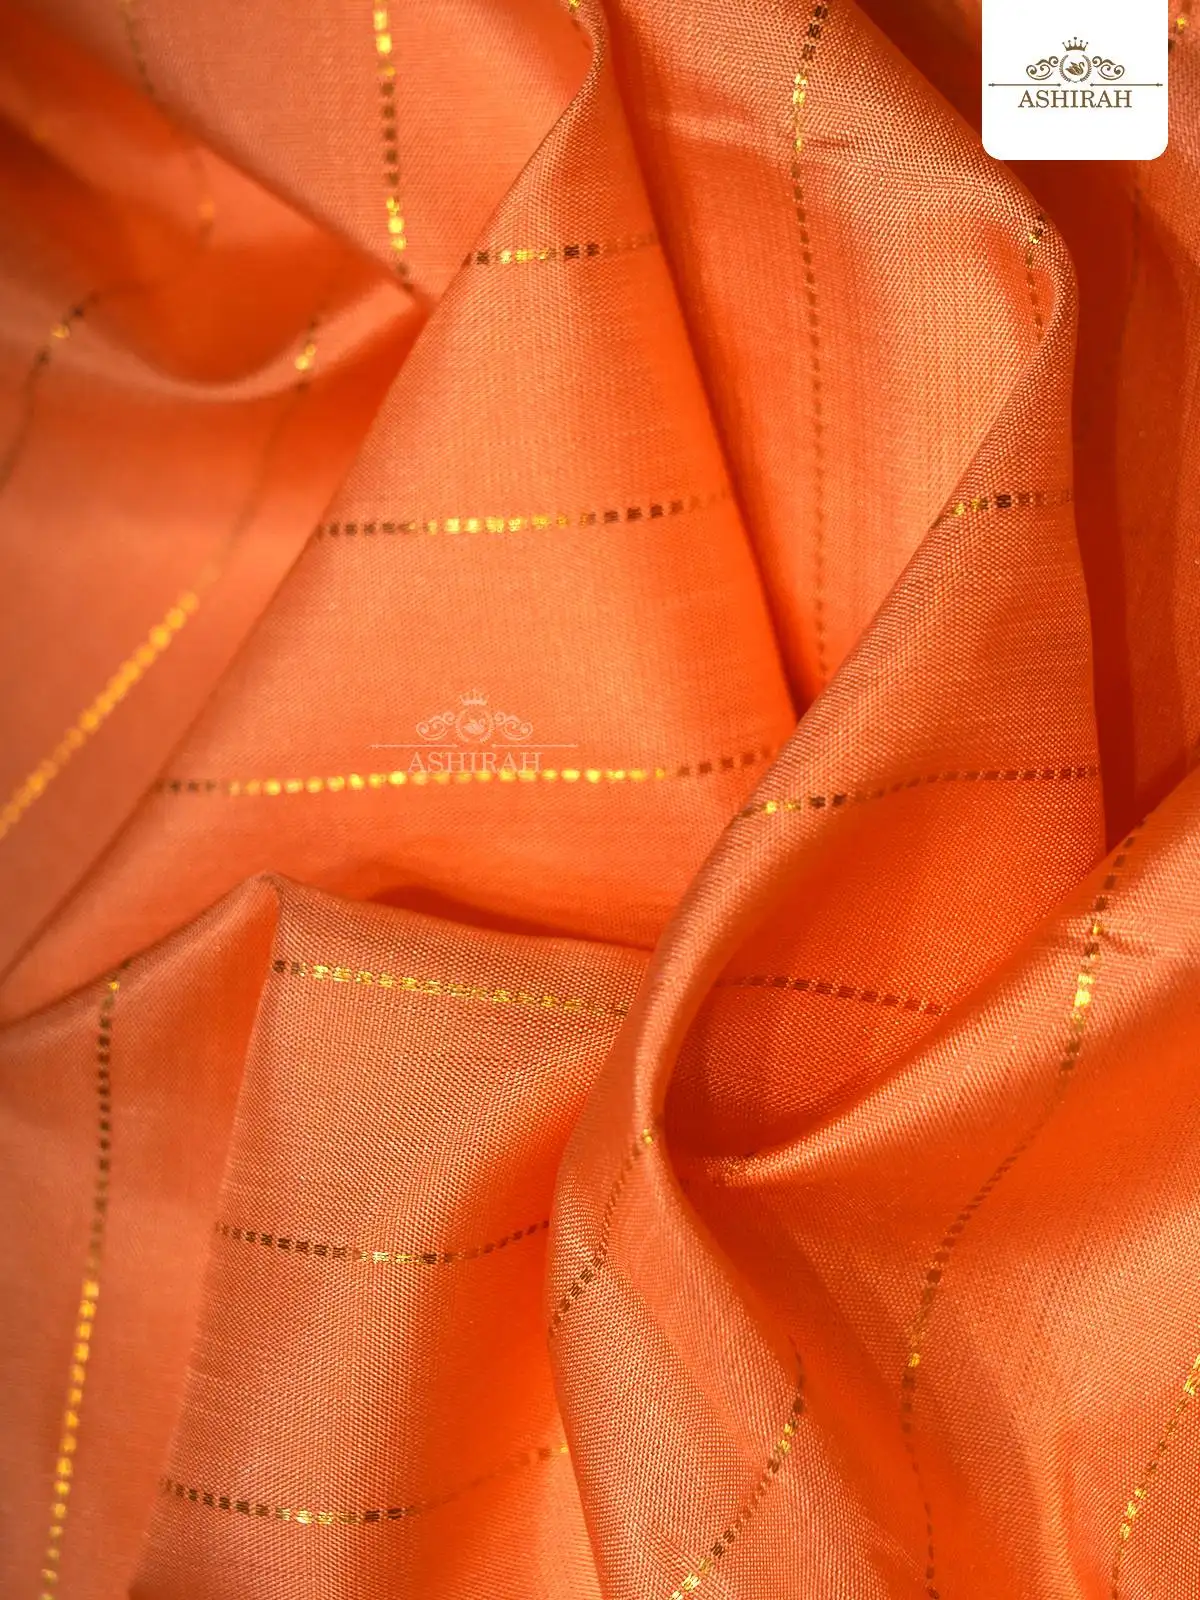 Orange Pure Kanchipuram Silk Saree With Manga Motifs And Horizontal Lines On The Body And Without Border